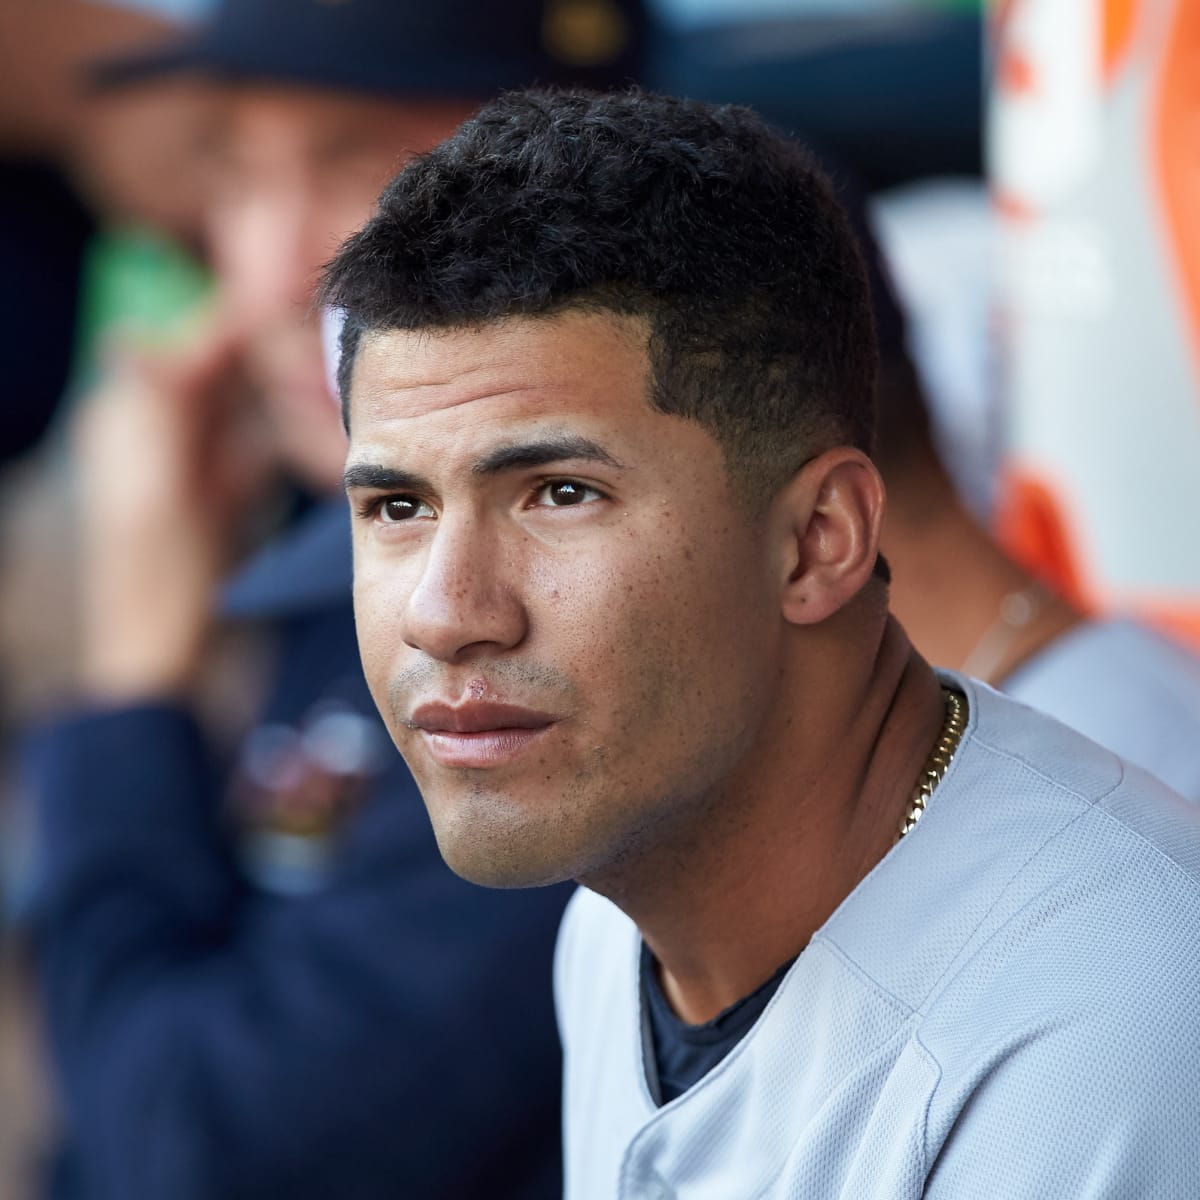 Gleyber Torres: Yankees call up top prospect - Sports Illustrated